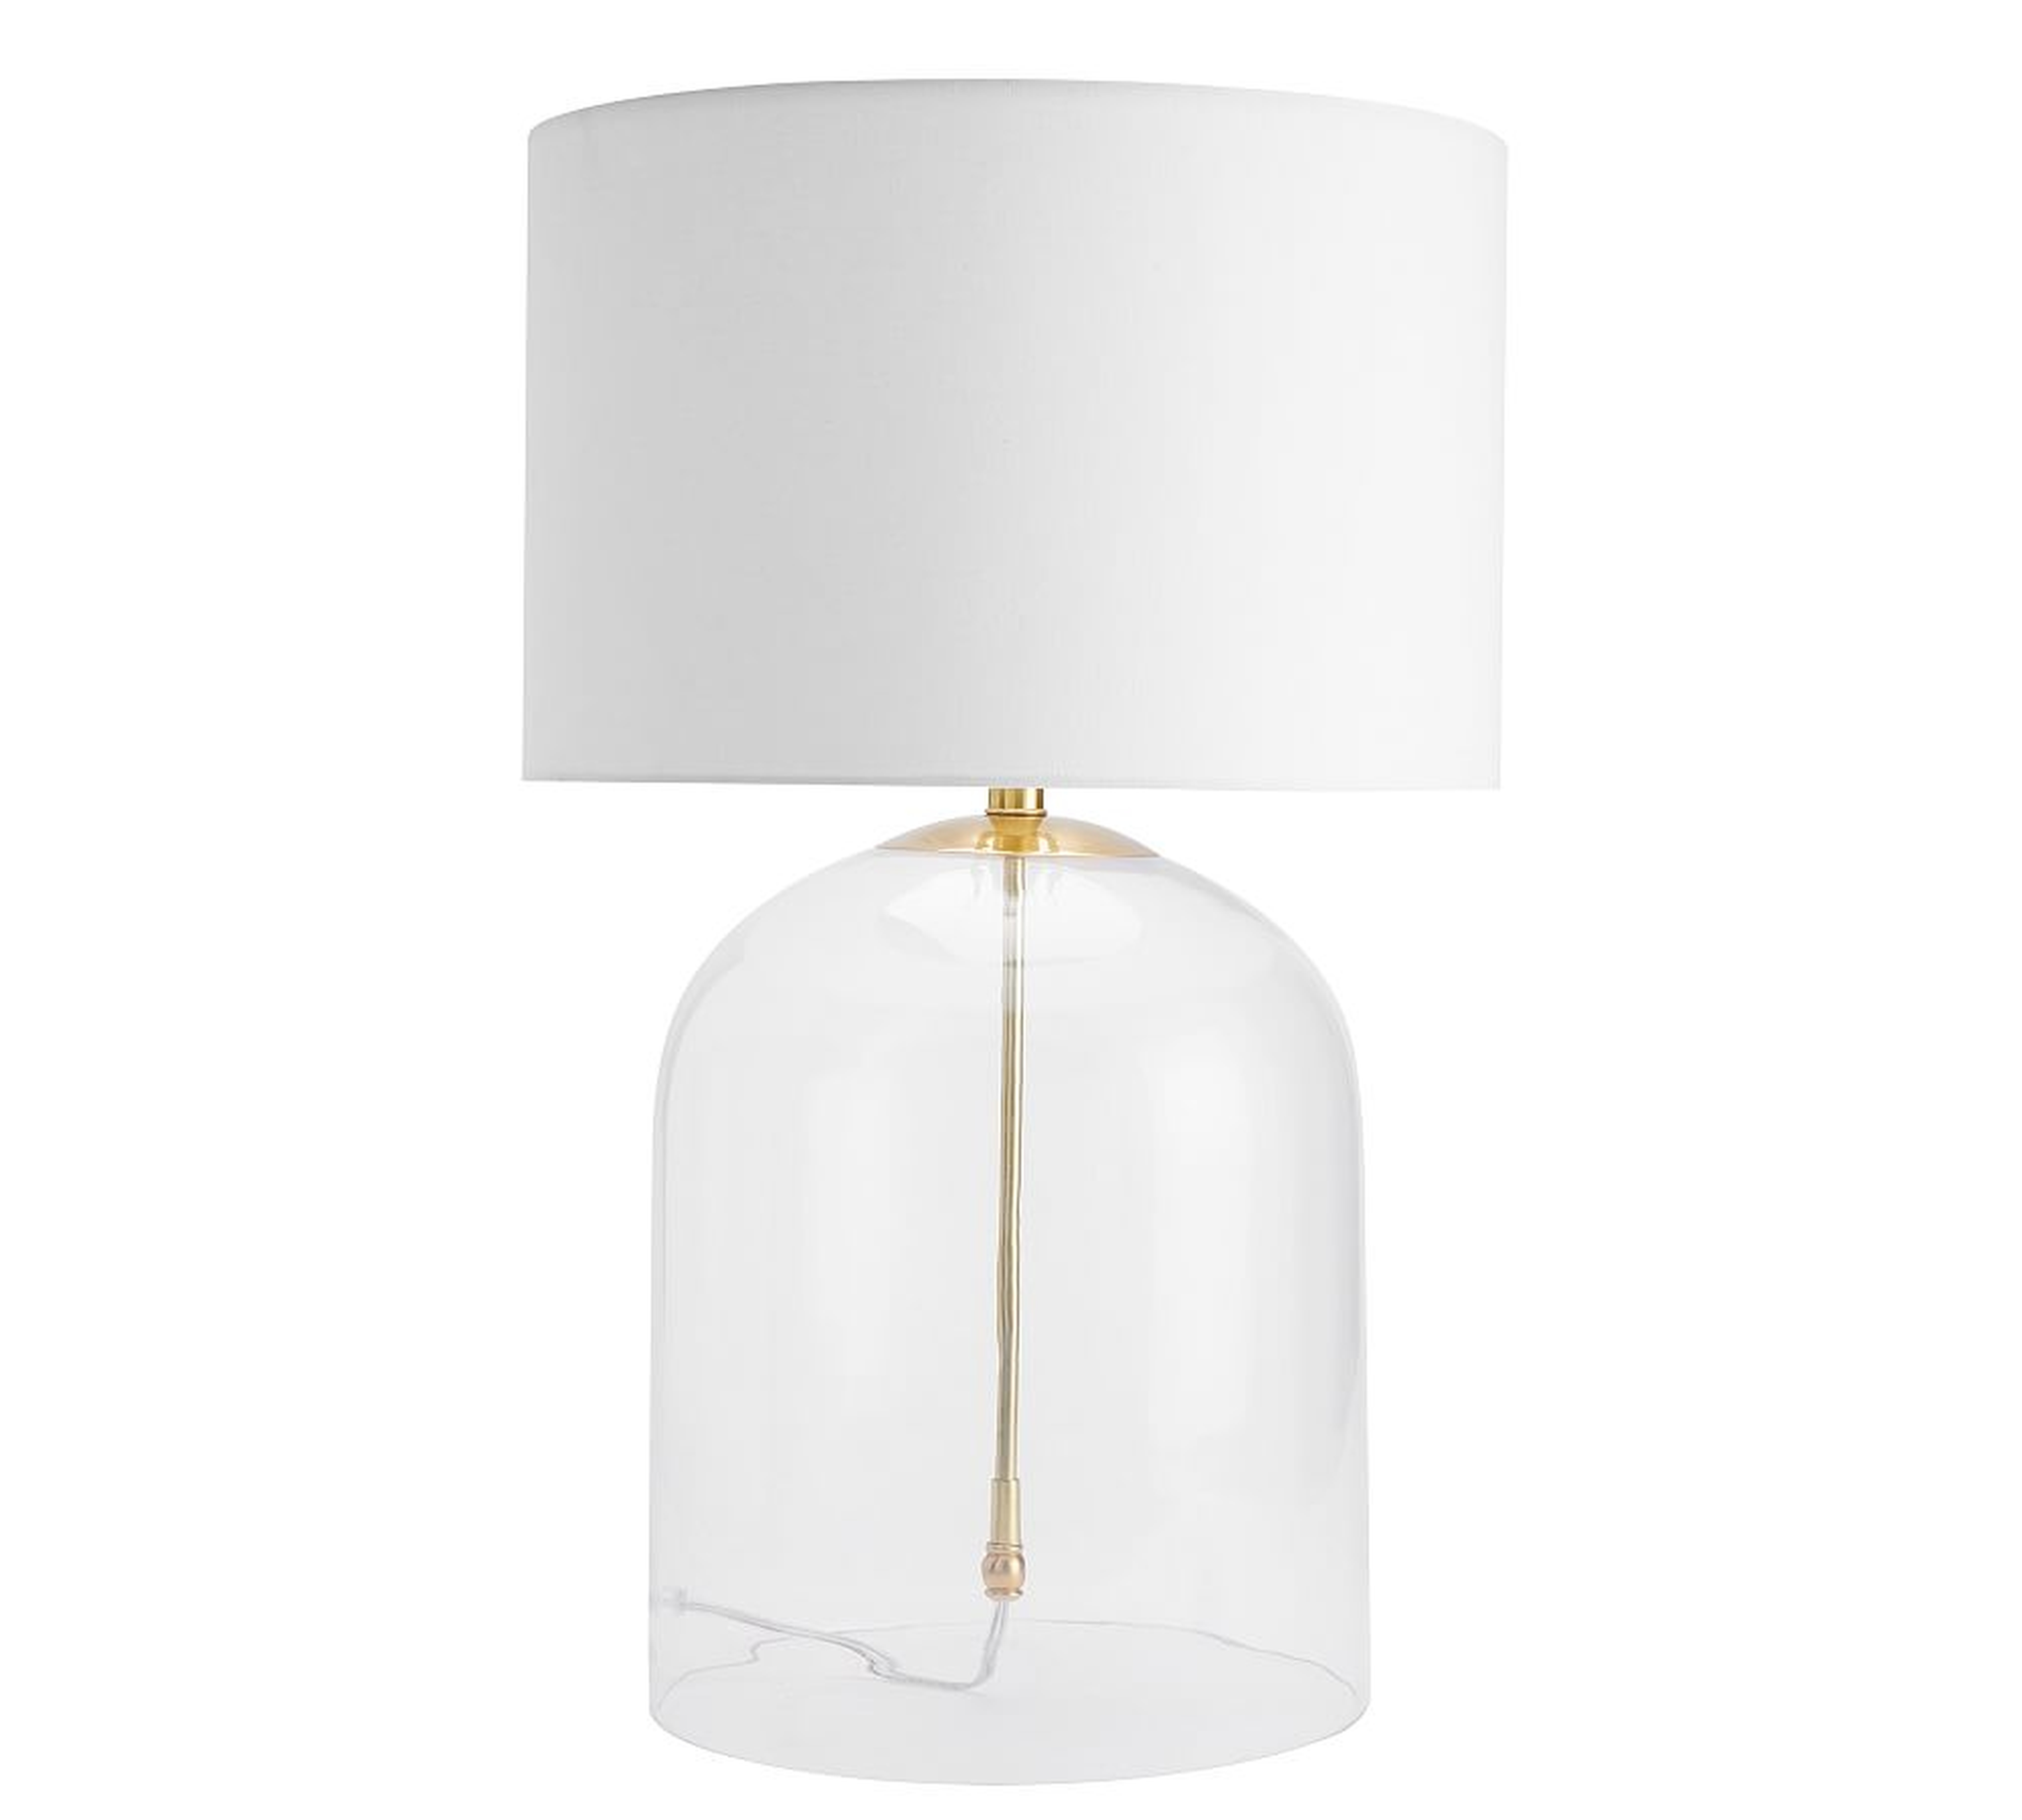 Aria Dome Table Lamp with Large Straight Sided Gallery Shade, Antique Brass/White - Pottery Barn